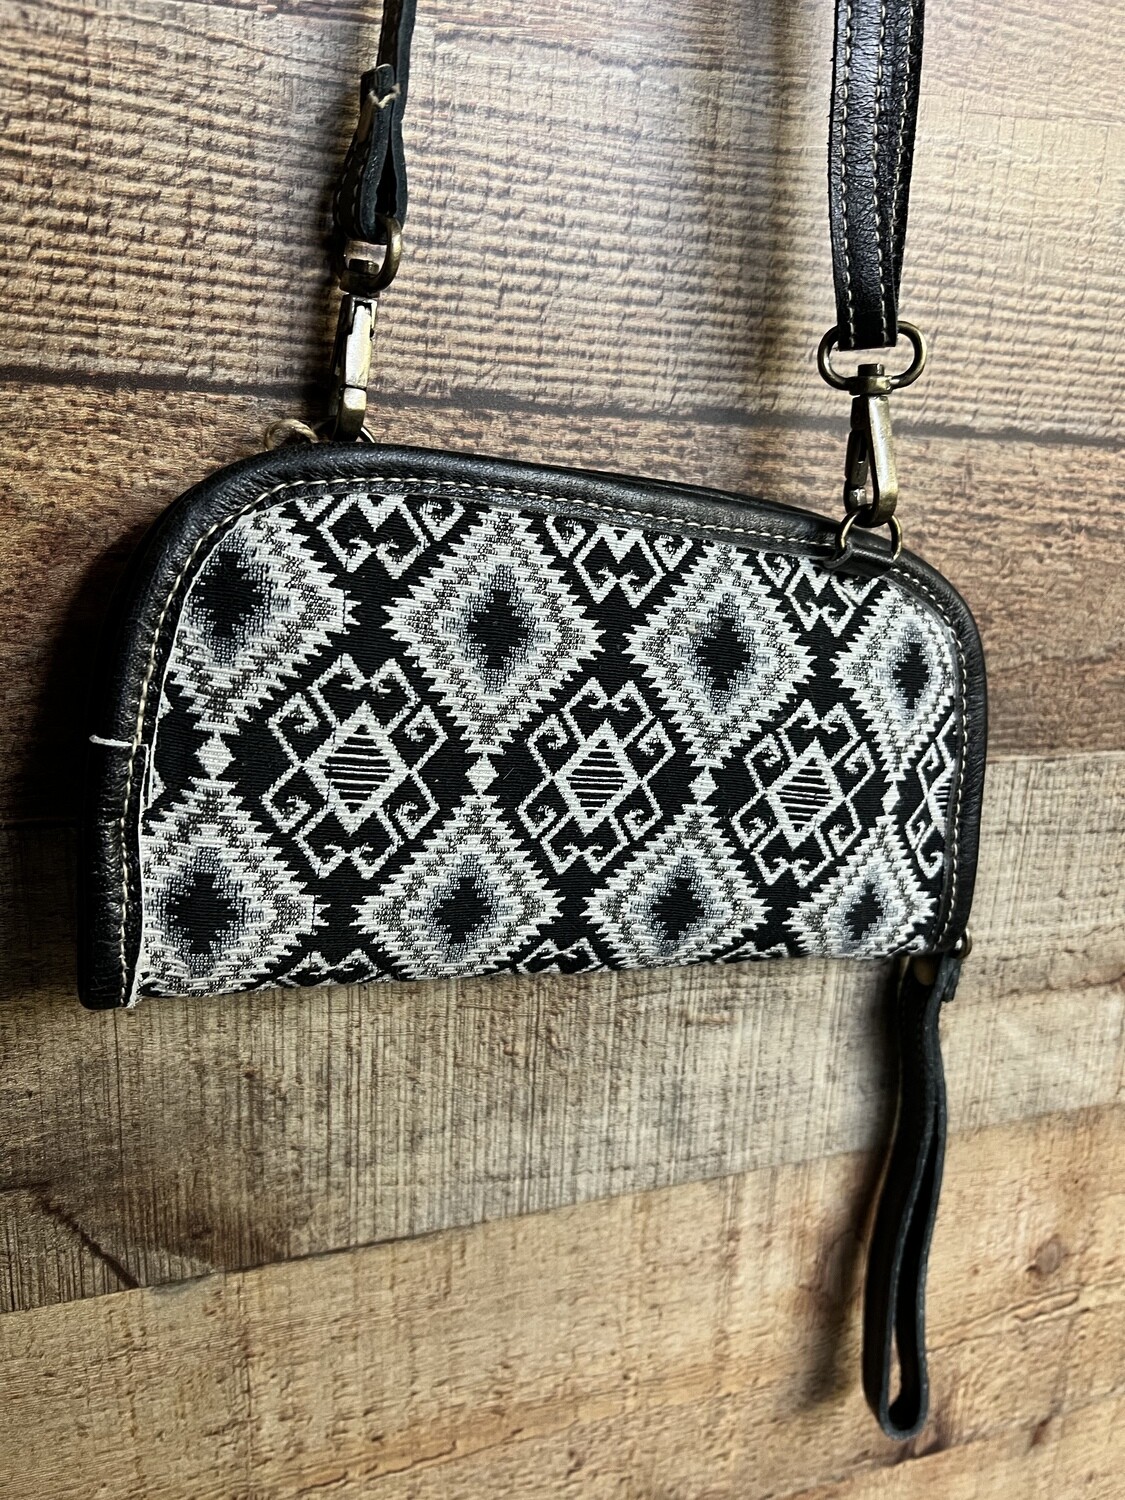 Aztec Design Upcycled Canvas Bag